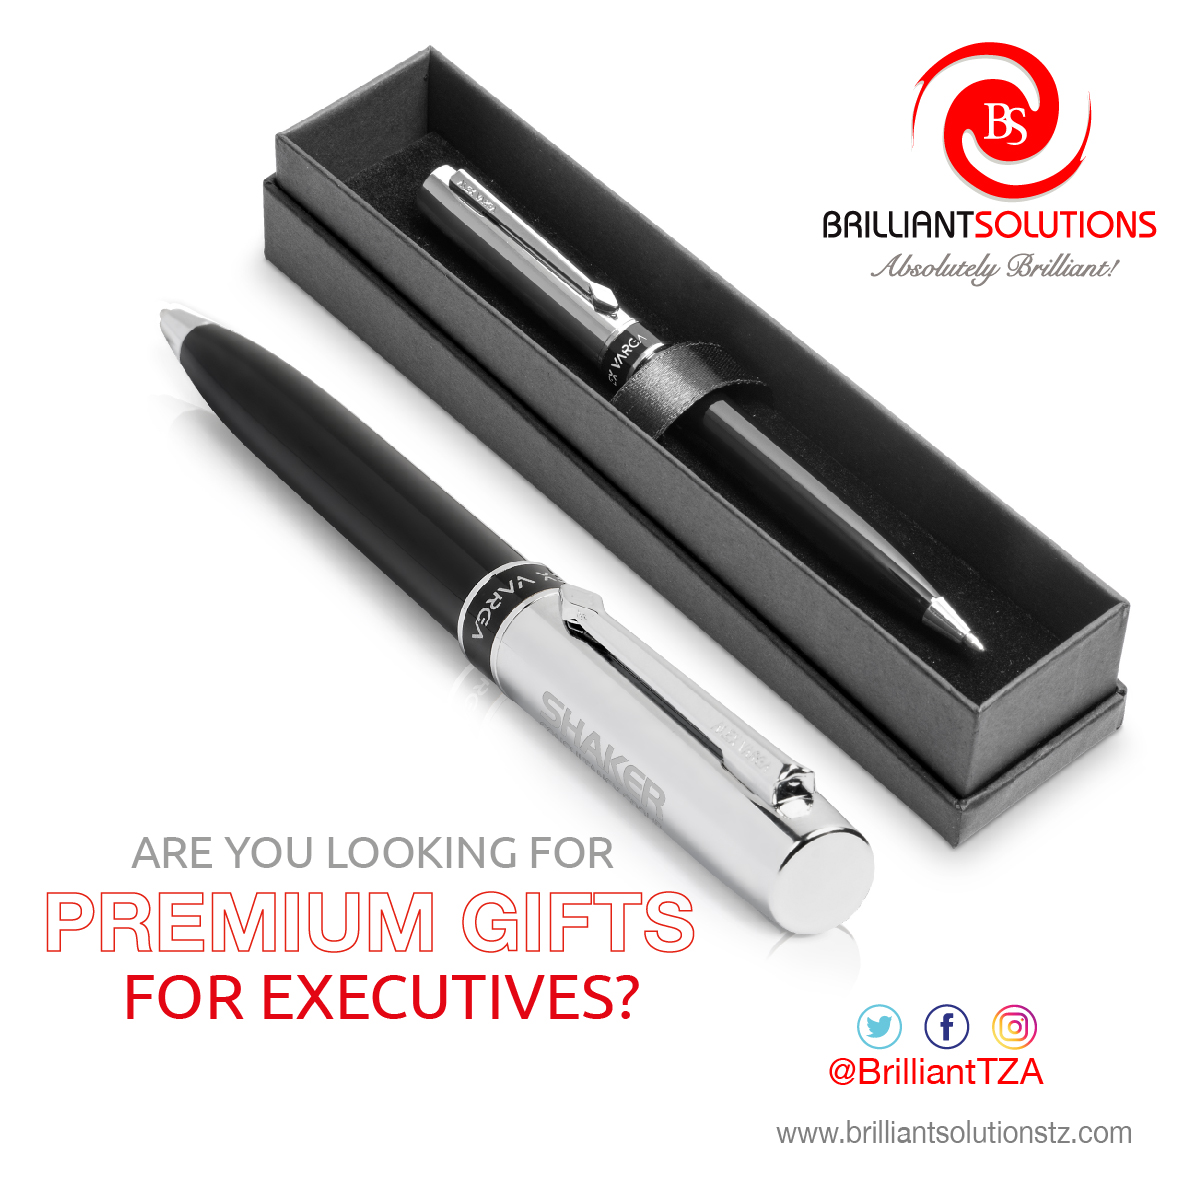 Look no further! executive pen, giftsets, notebook, gifts and much more.

Call or whatsapp us: +255 715 296085, sales@brilliantsolutionstz.com

#GiveAways #Promotionalitems #BrilliantSolutions #BrilliantTza #AbsolutelyBrilliant #PromotionItemsSuppliersInTanzania